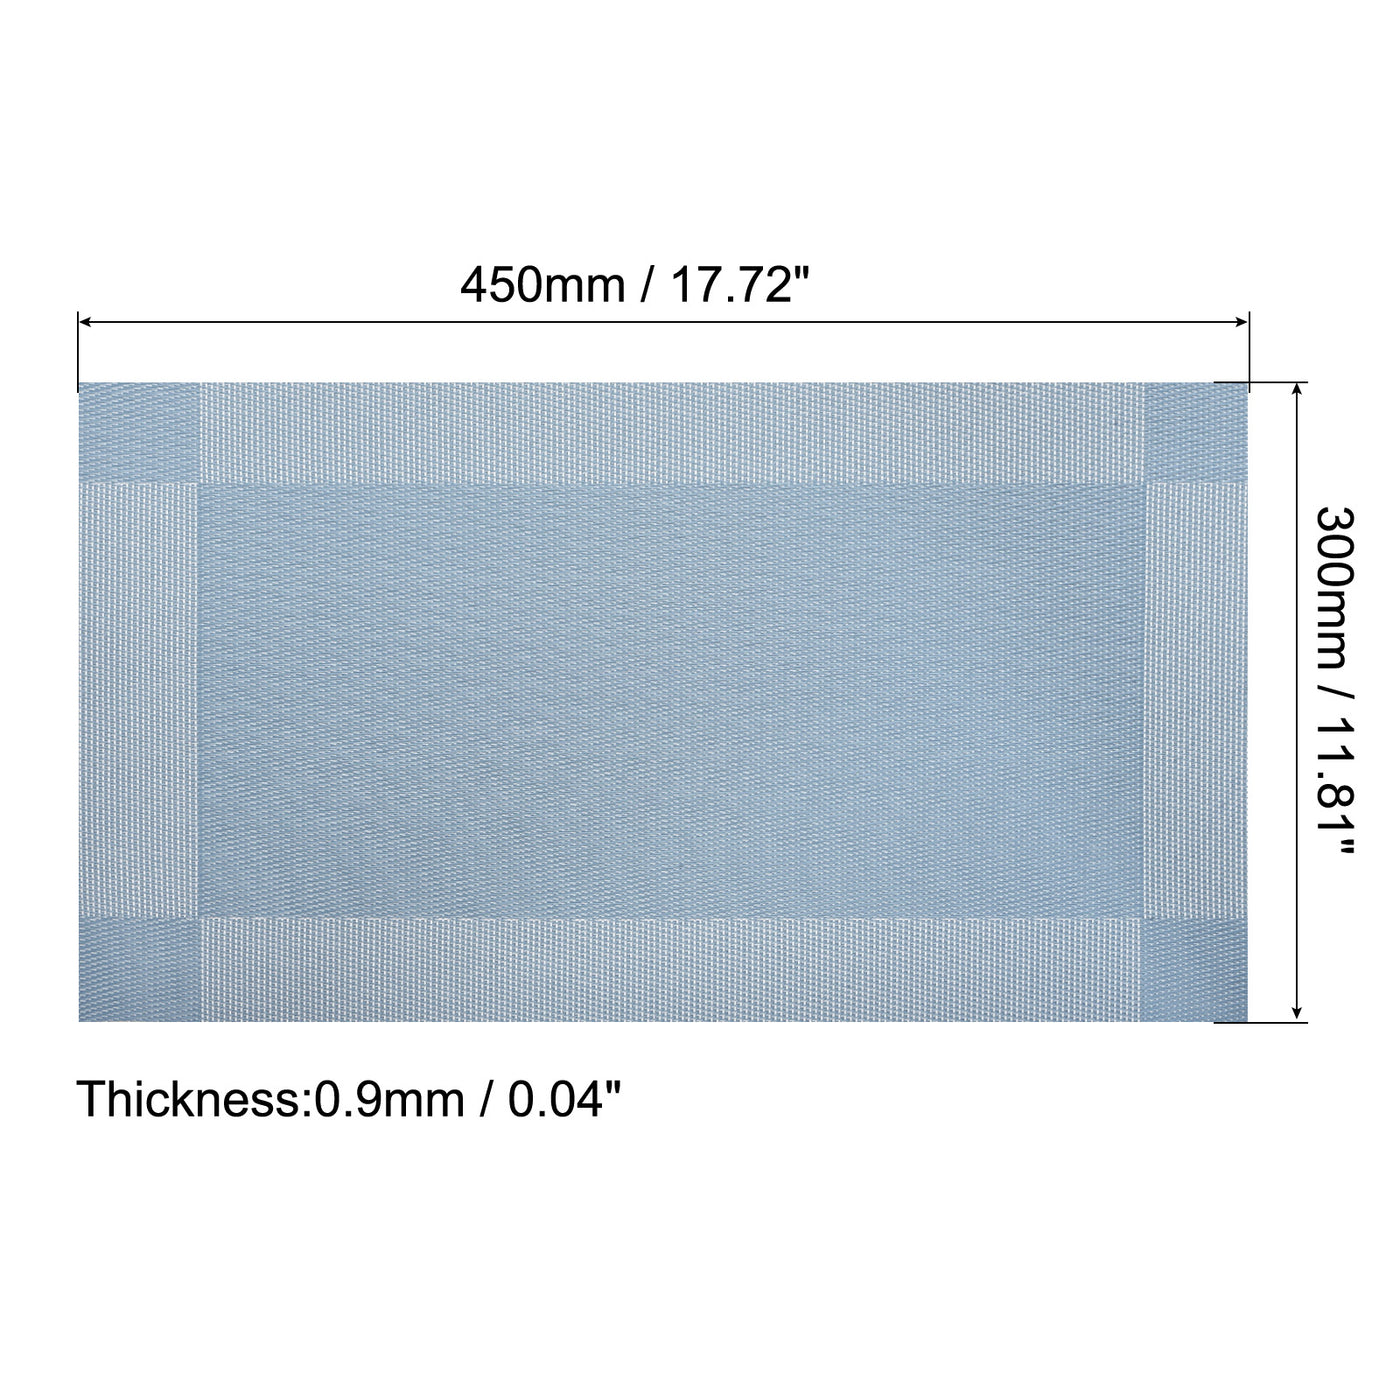 uxcell Uxcell Place Mats 450x300mm 4pcs PVC Table Washable Woven Placemat, Lake Blue